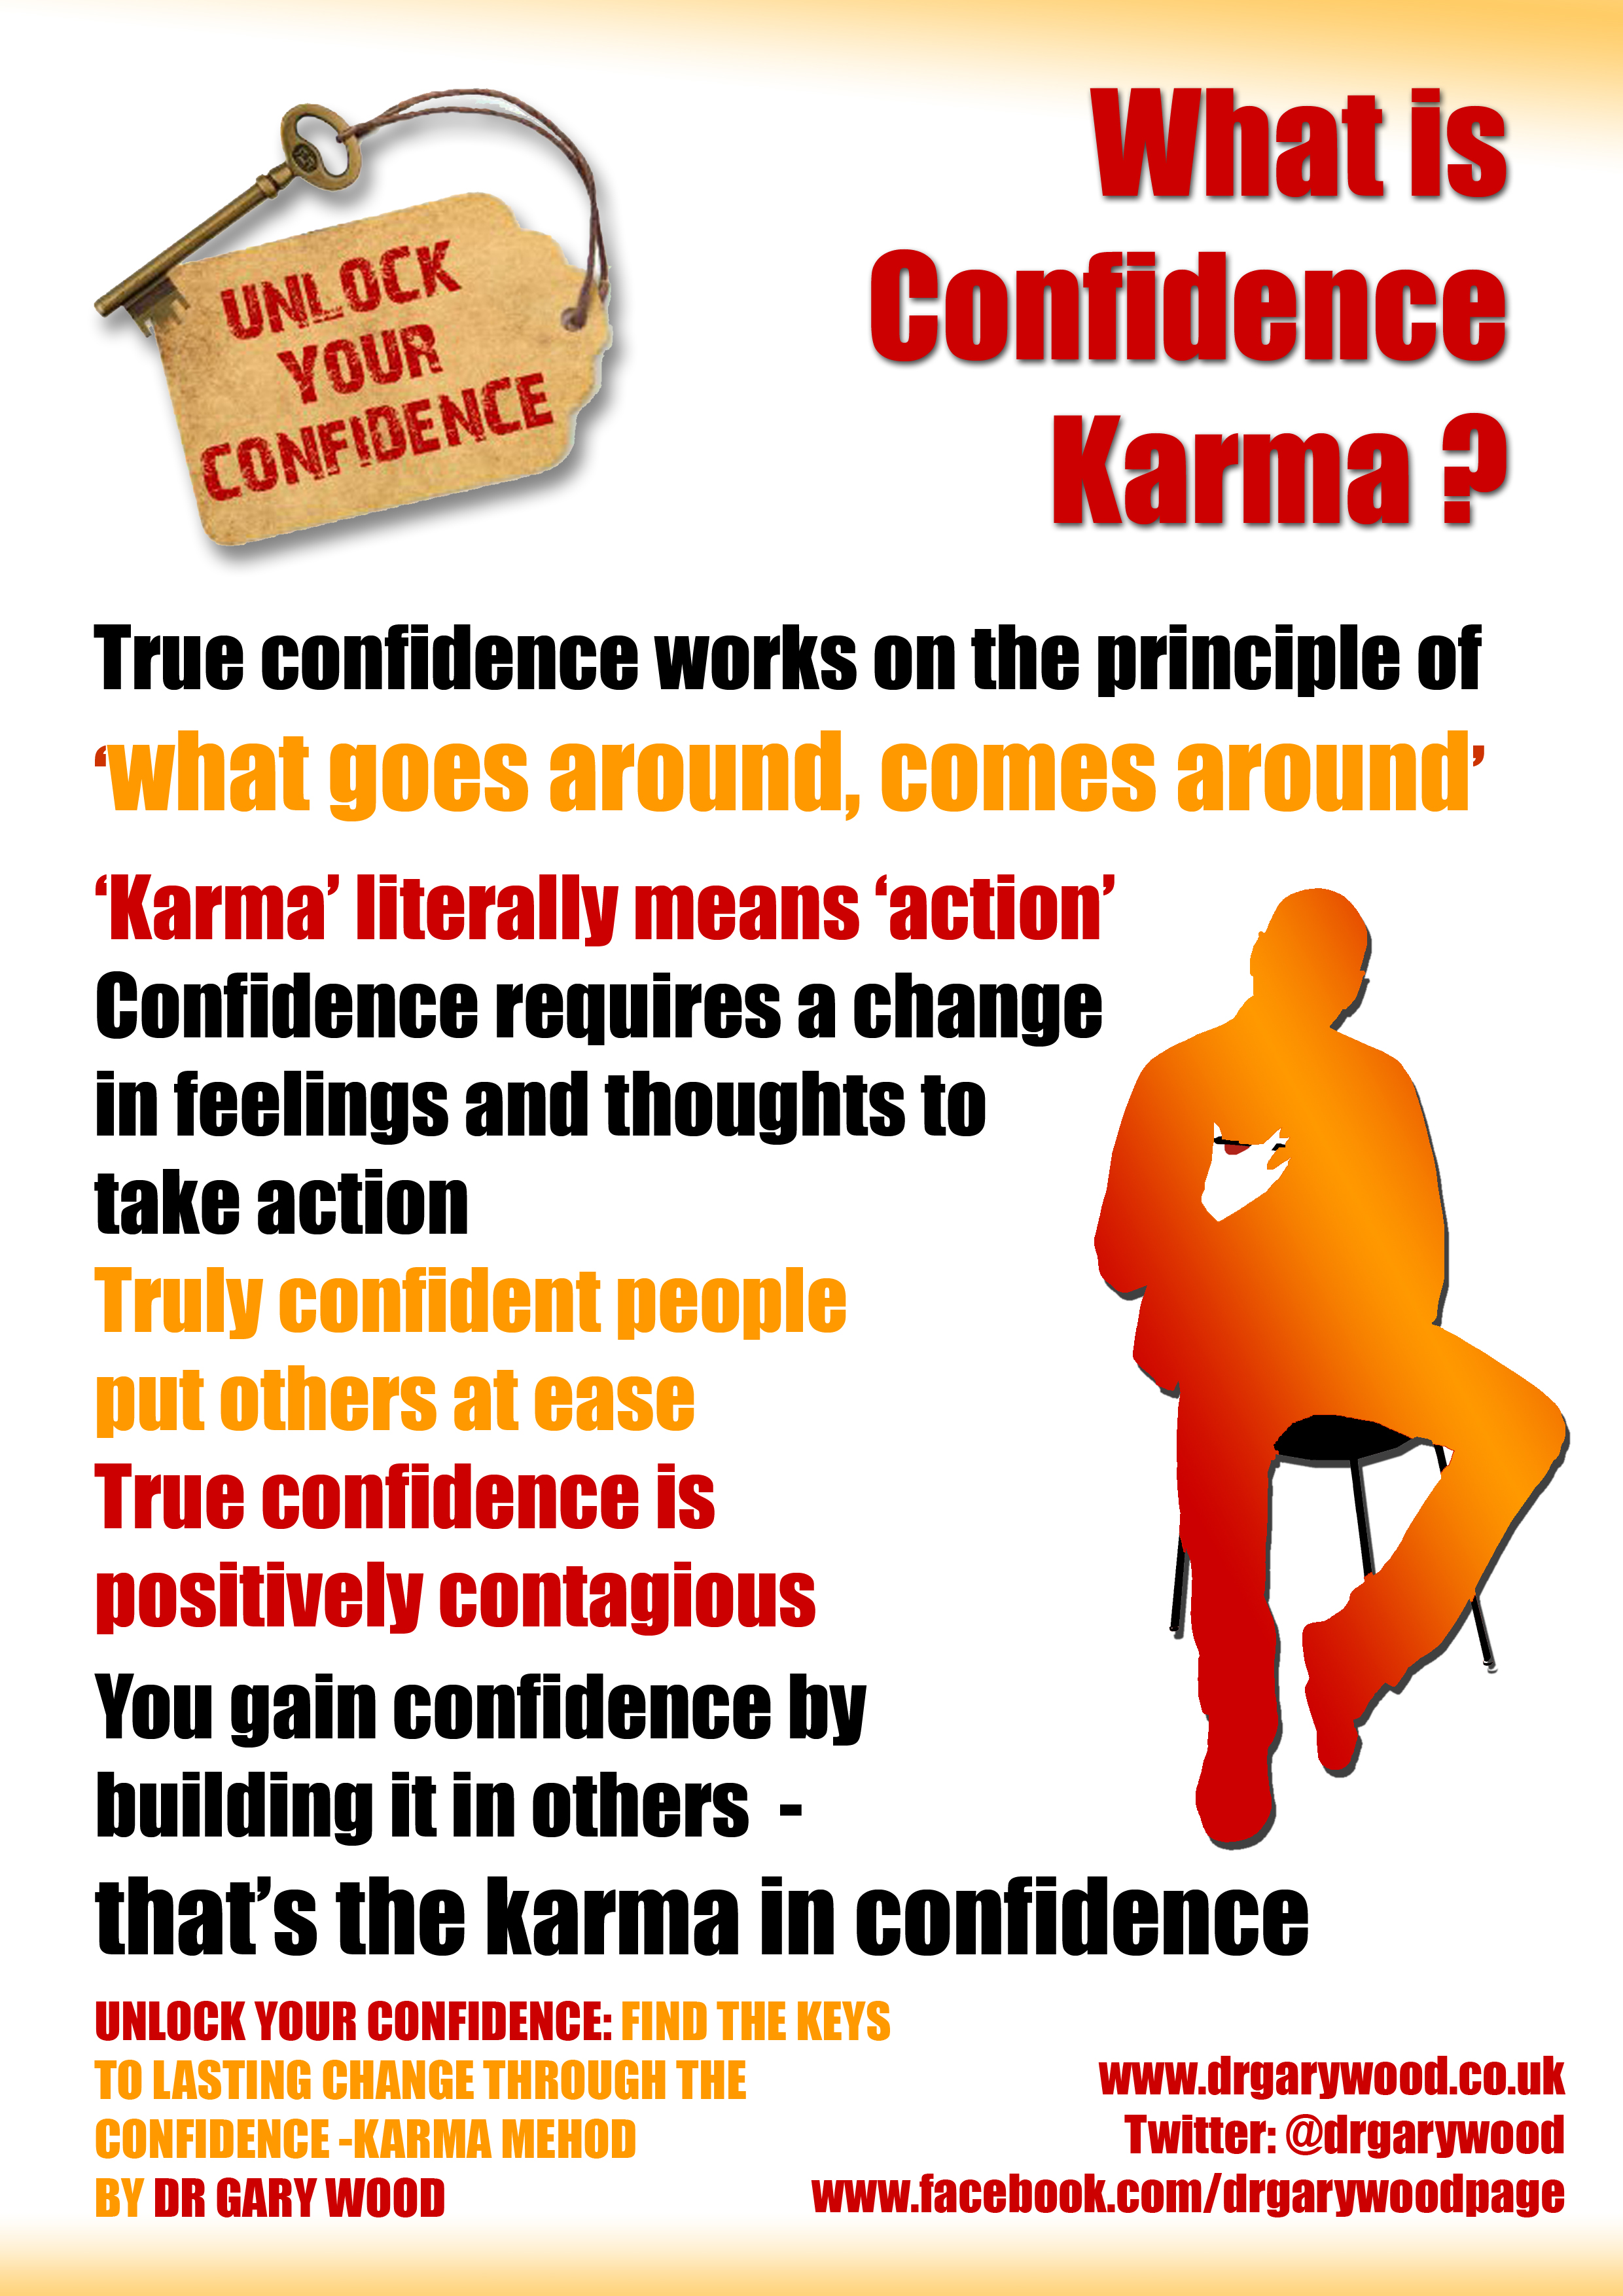 quotes about mean people and karma